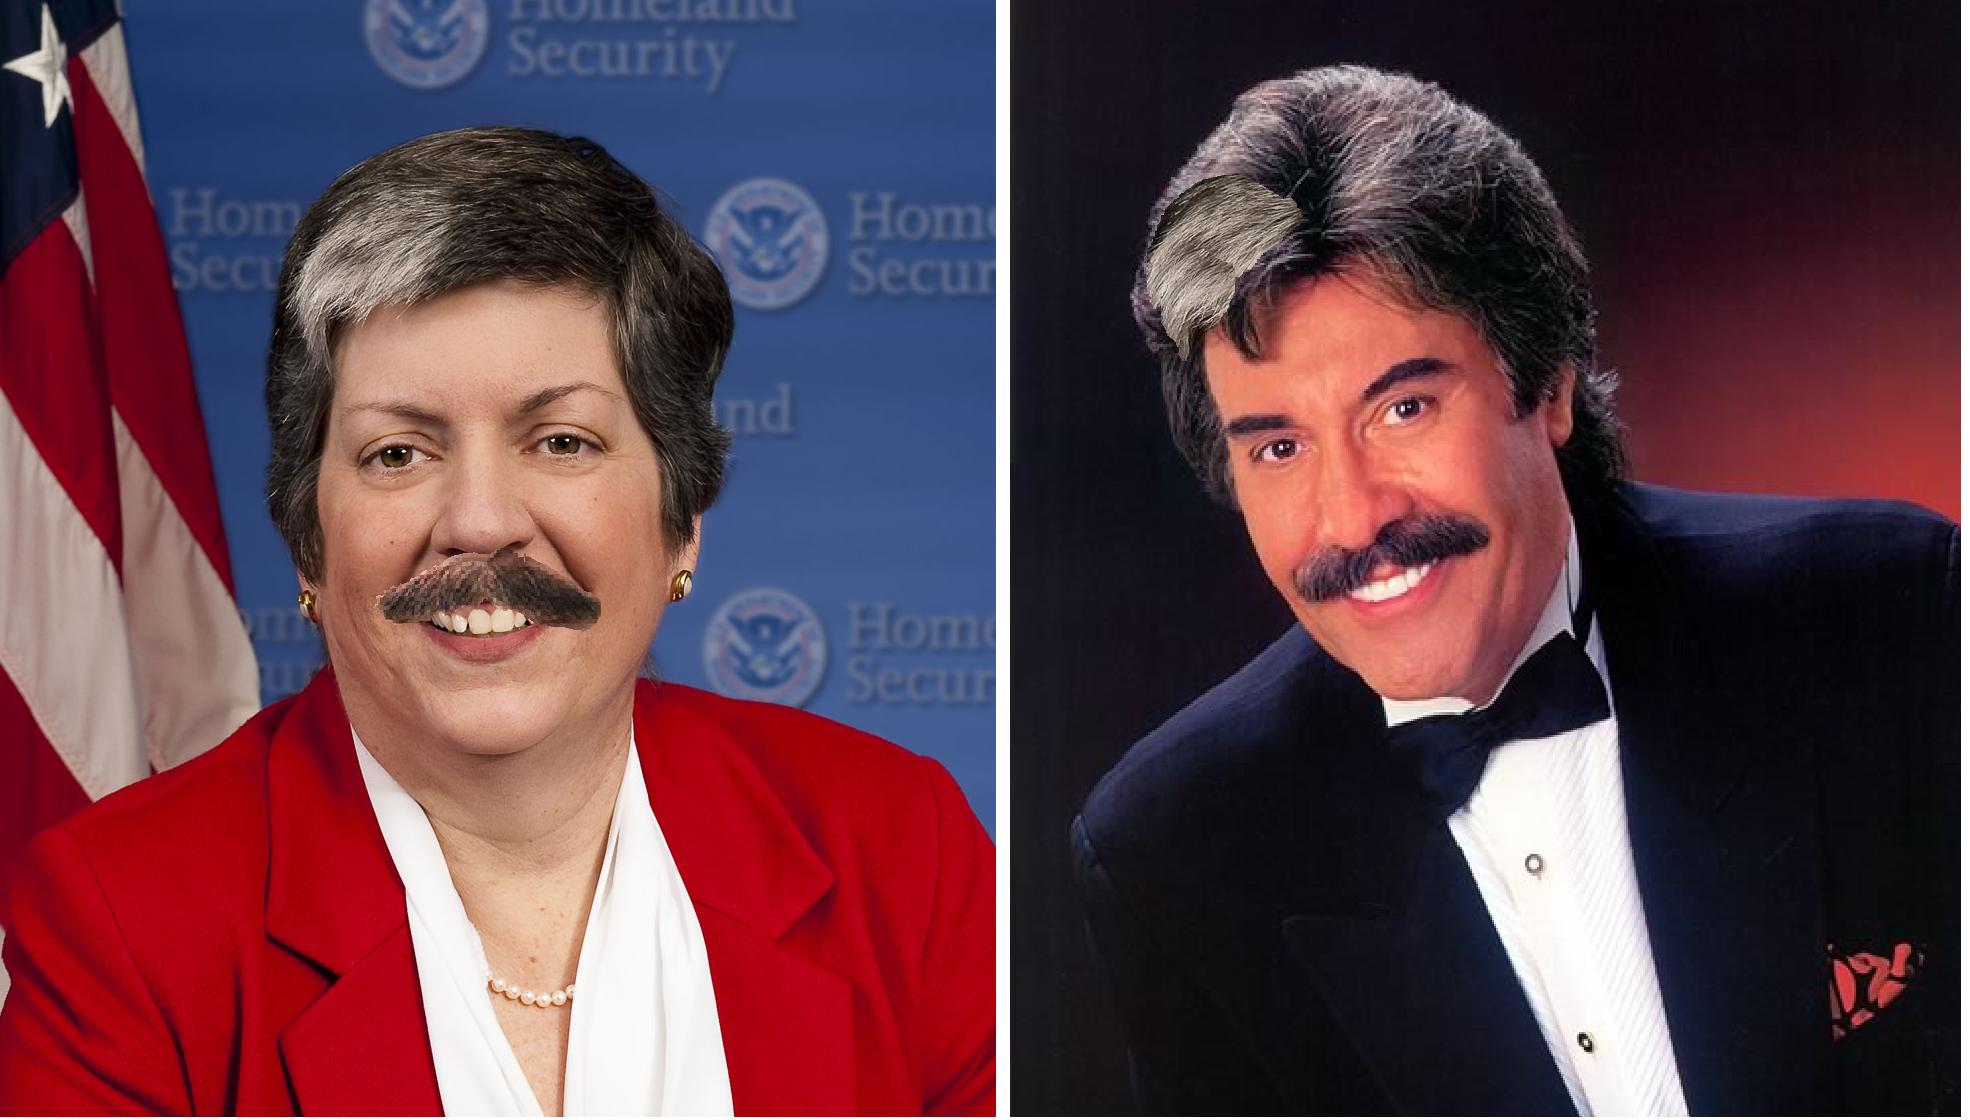 Proof positive that Janet Napolitano and Tony Orlando are one in the same!